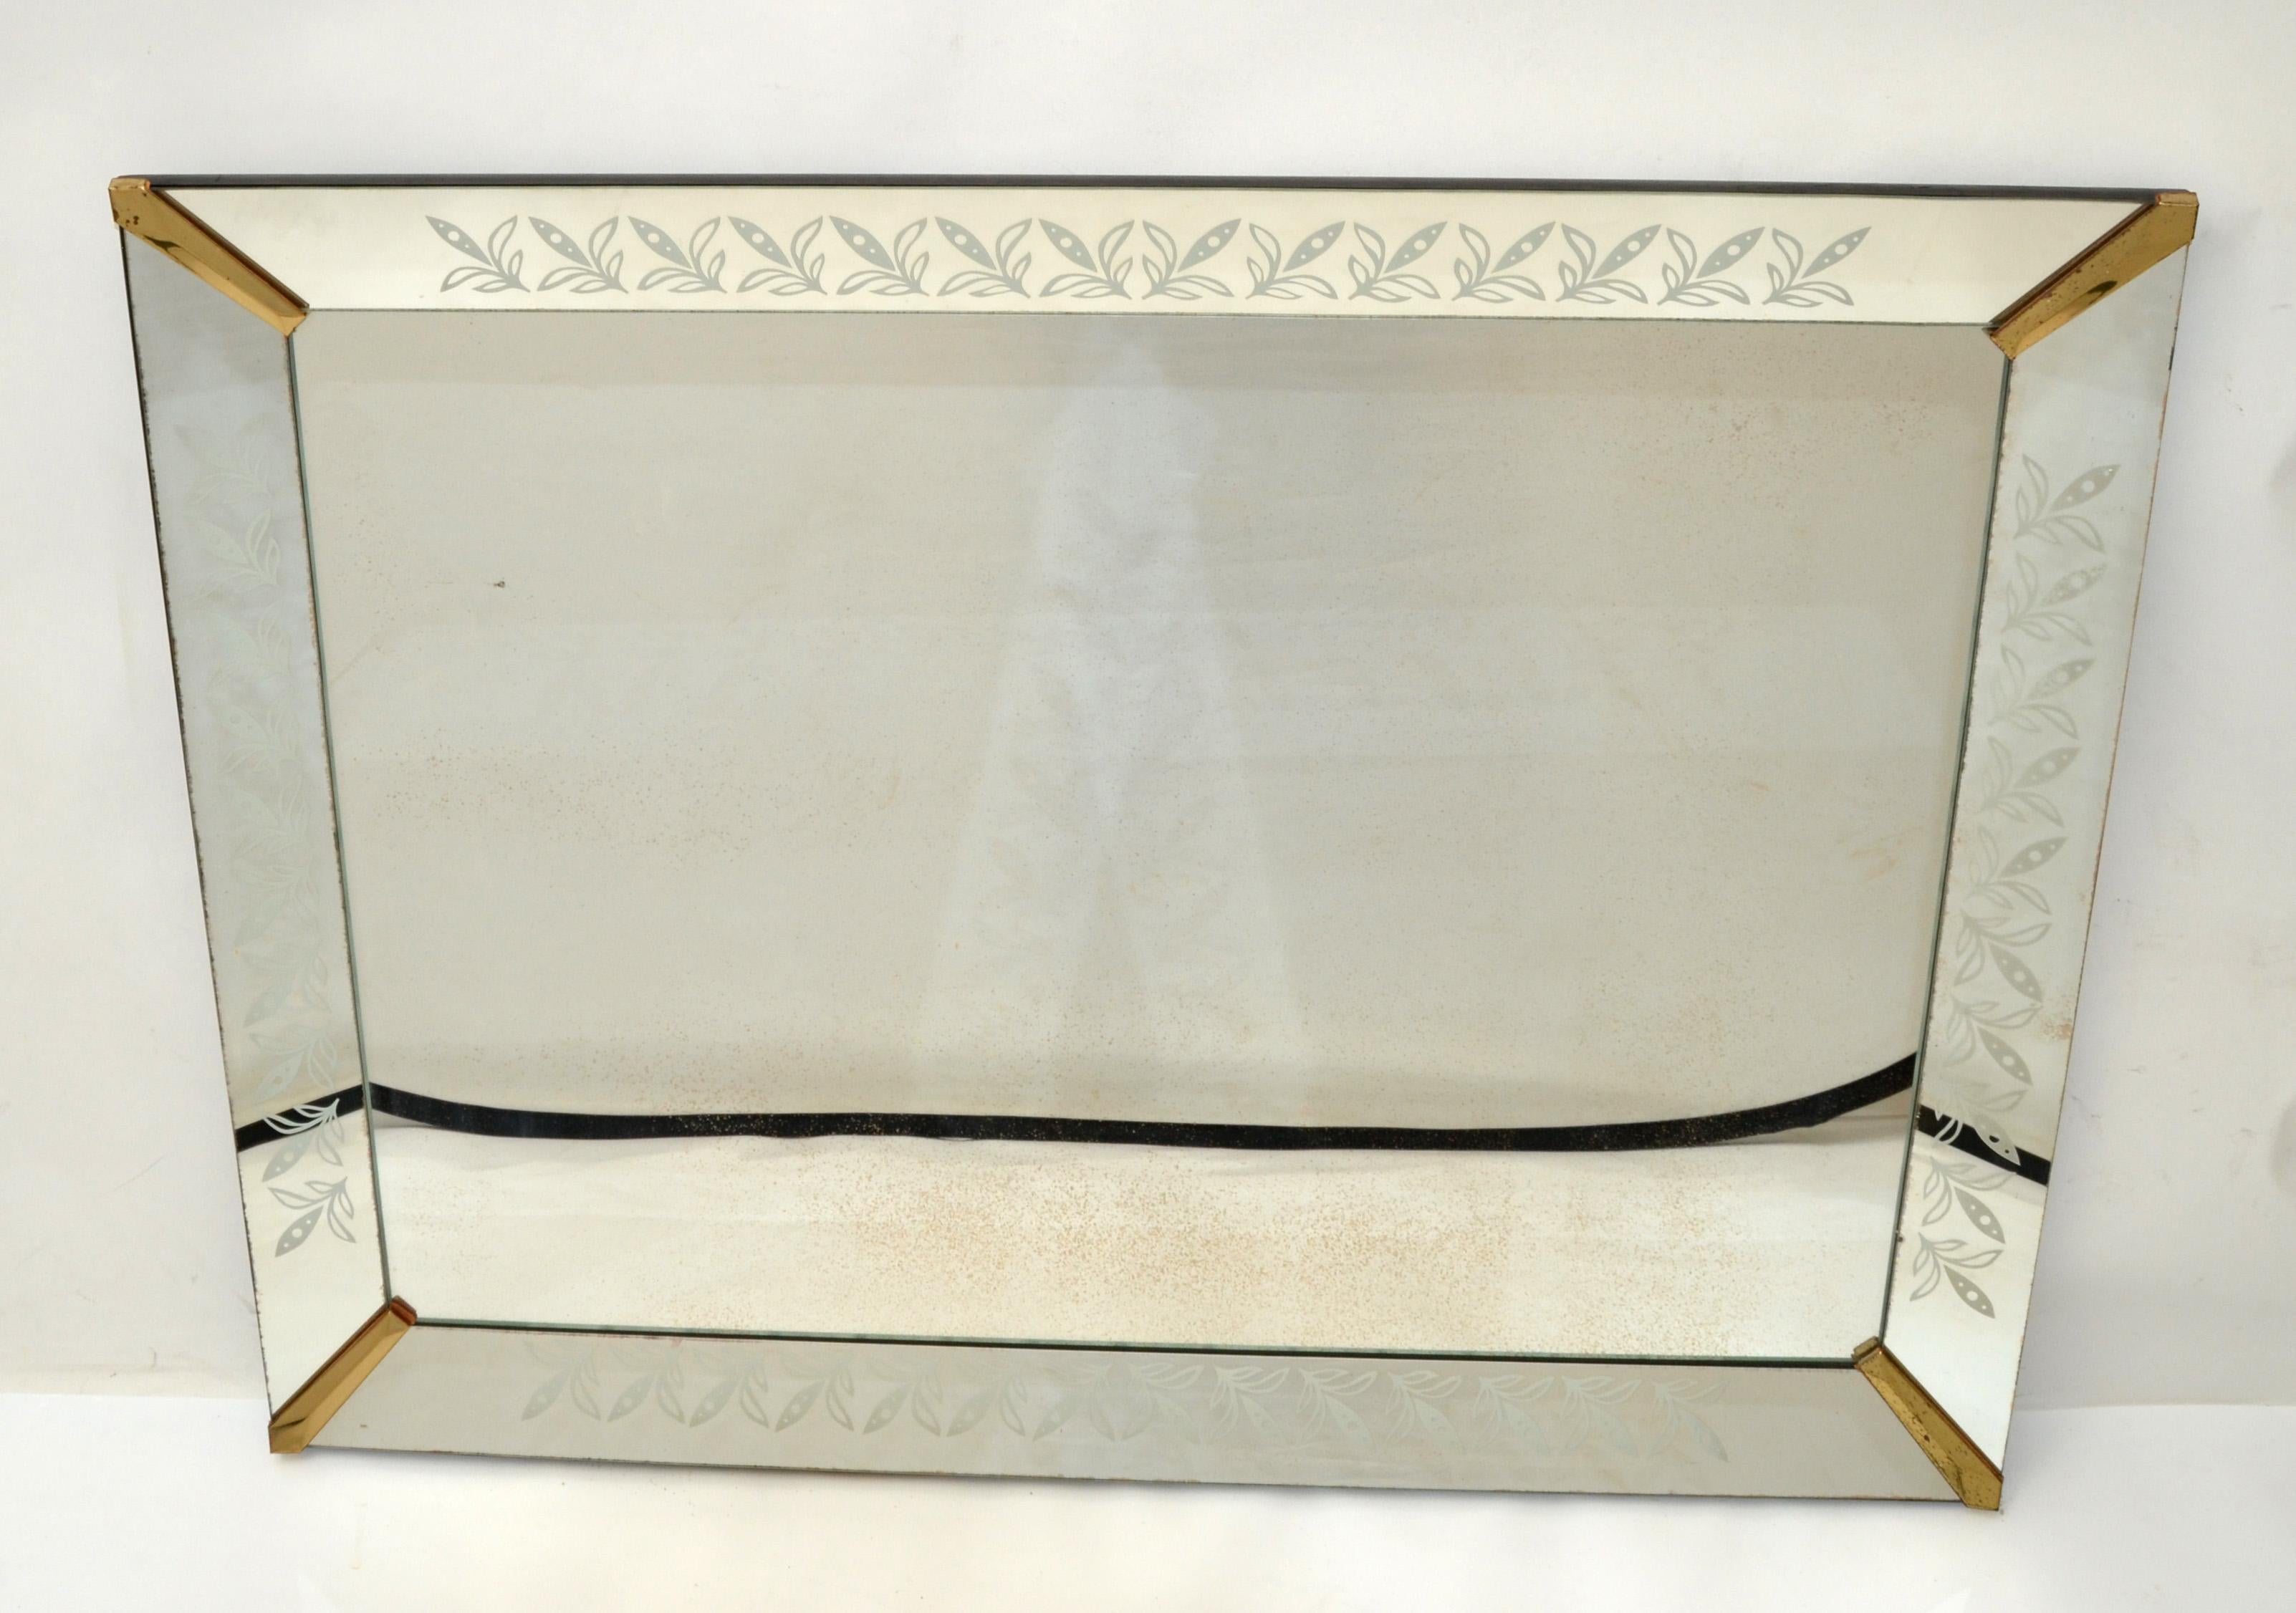 Metal 1940s Art Deco Venetian Style Etched Wall Mirror with Brass Finished Corners For Sale